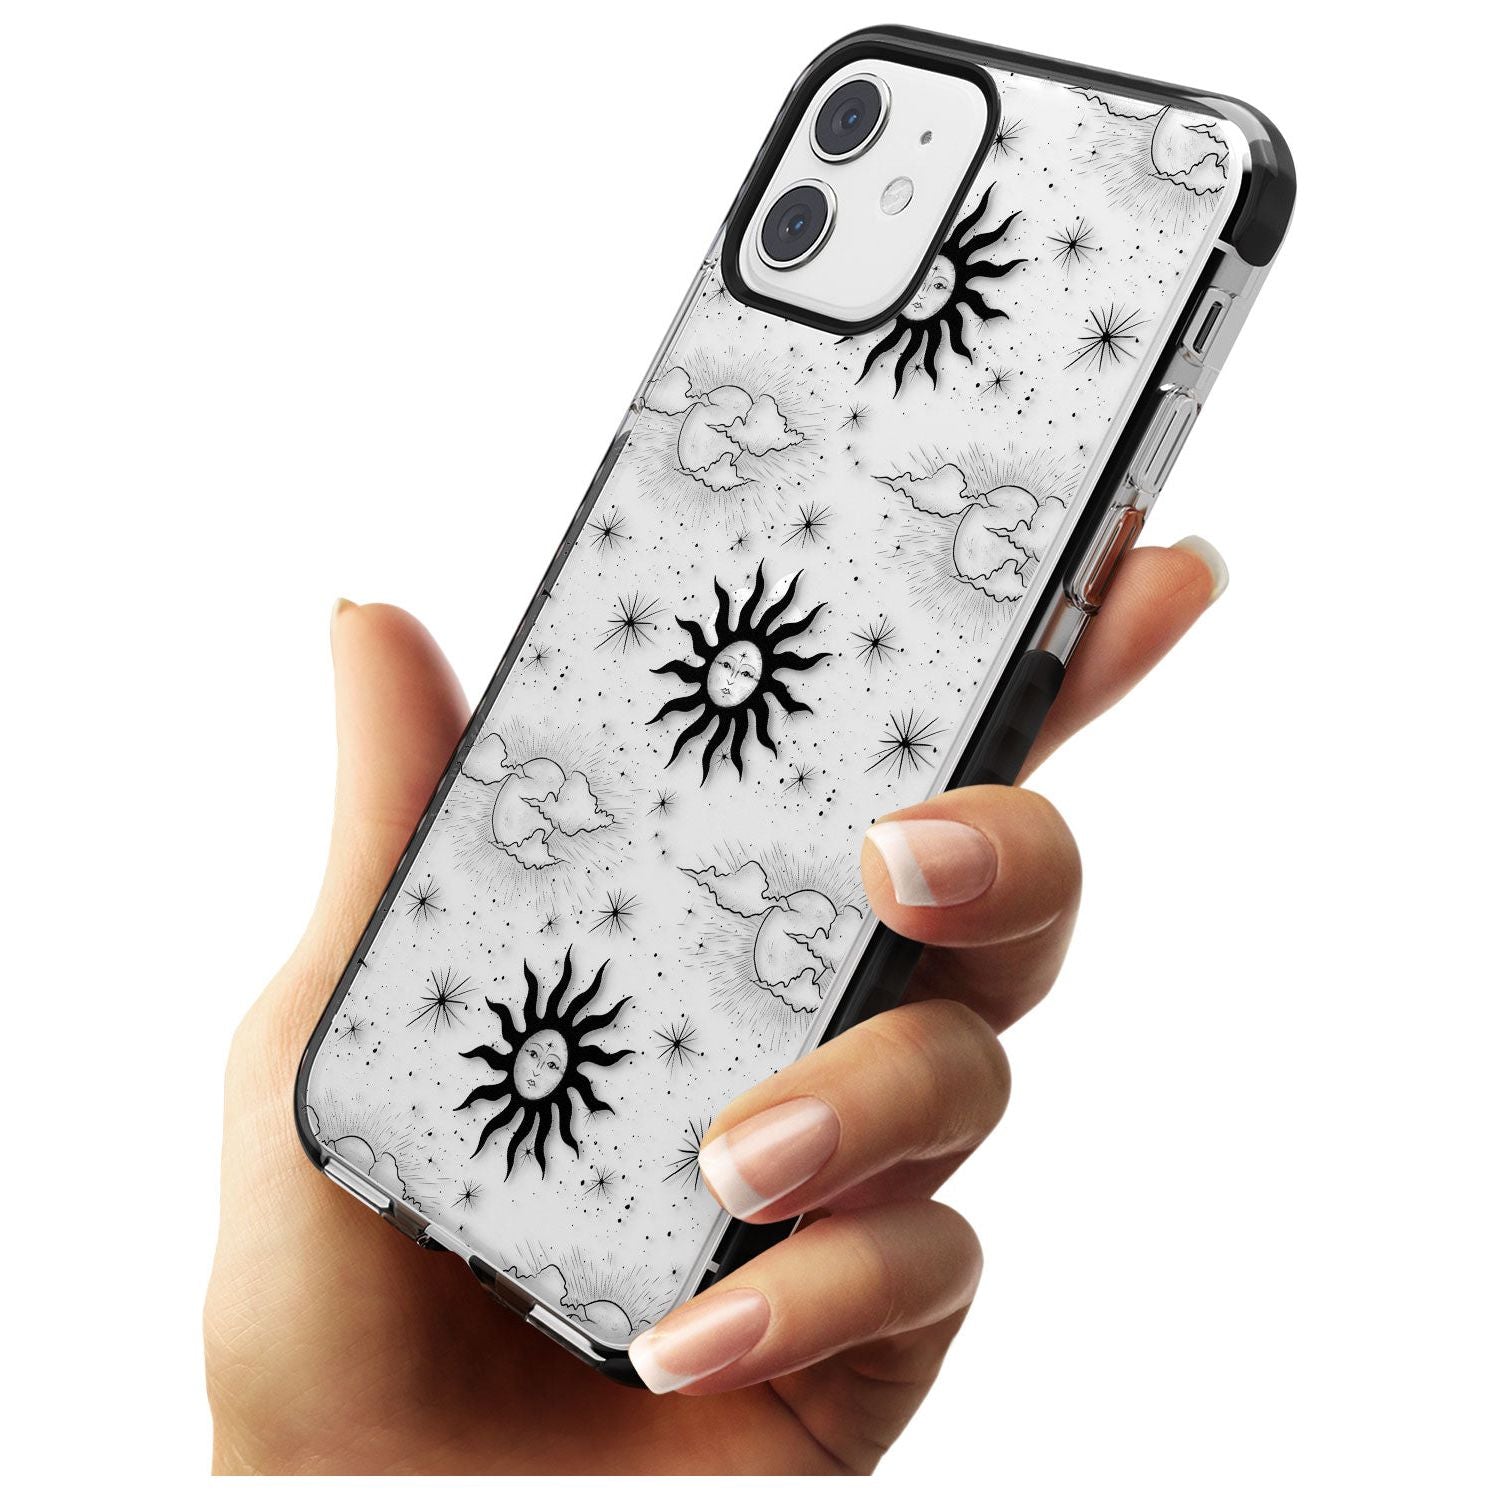 Suns & Clouds Vintage Astrological Black Impact Phone Case for iPhone 11